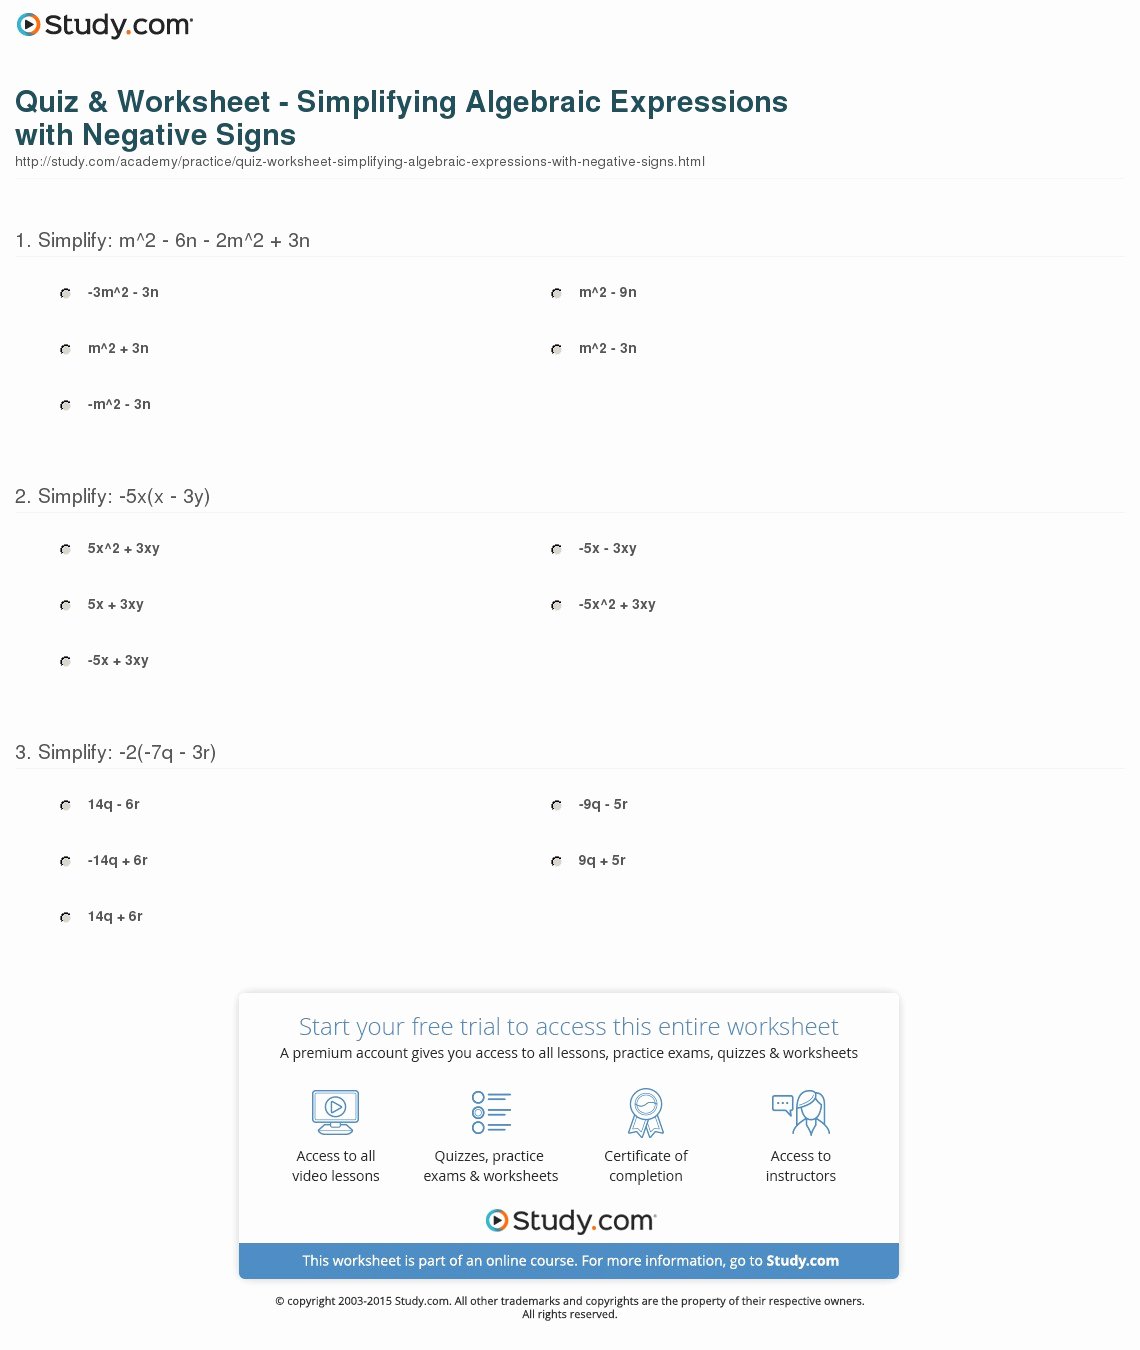 Simplifying Linear Expressions Worksheet Elegant Quiz &amp; Worksheet Simplifying Algebraic Expressions with